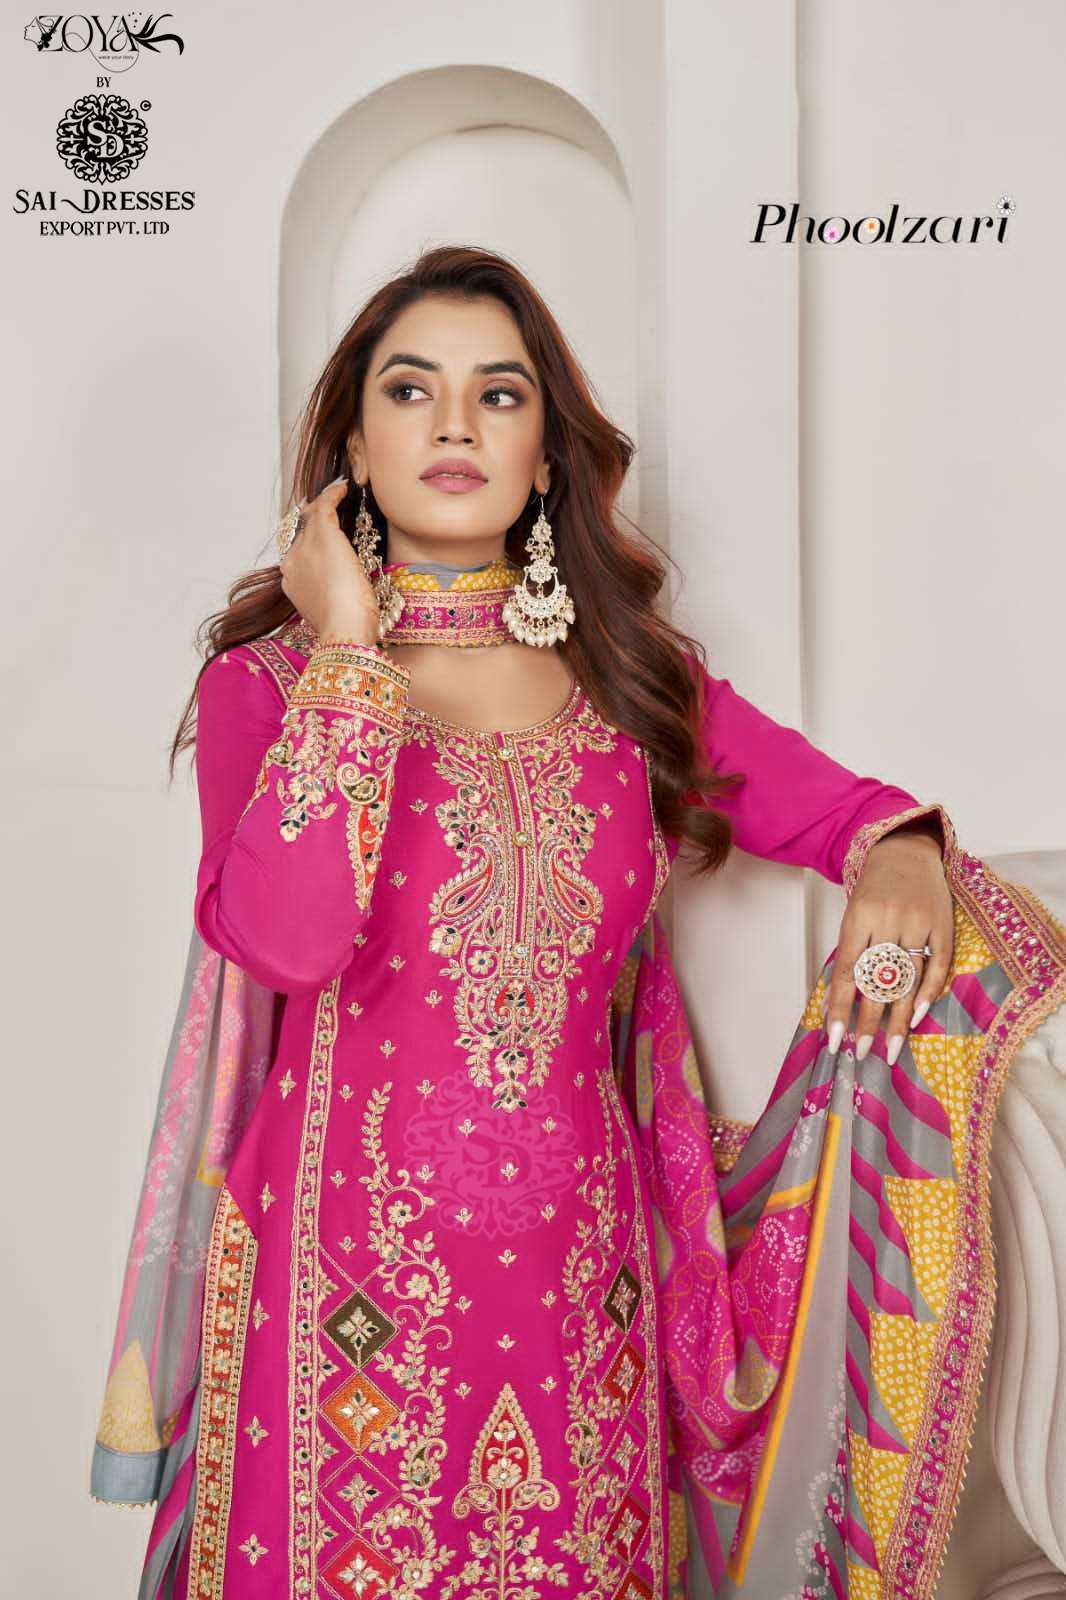 PHOOLJARI  READY TO PARTY WEAR DESIGNER 3 PIECE SUITS IN WHOLESALE RATE IN SURAT 